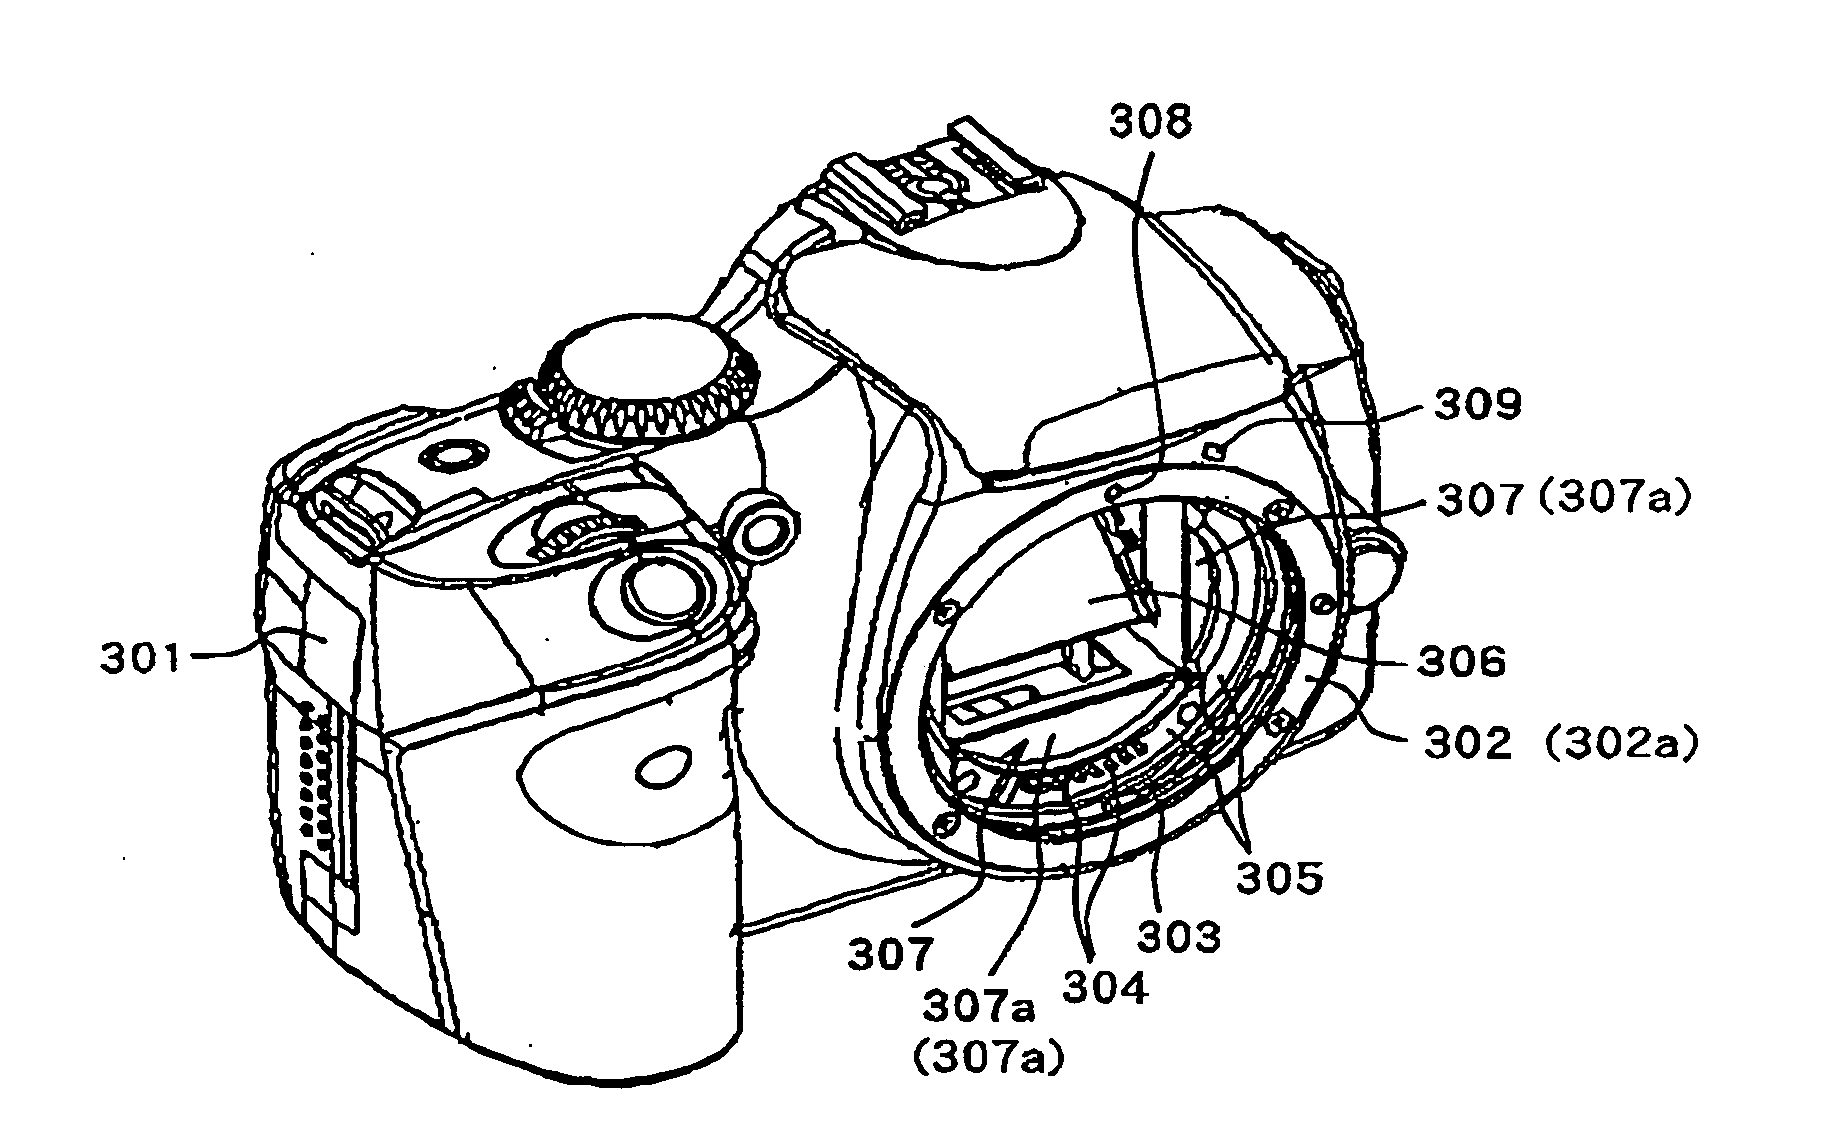 Interchangeable lens, interchangeable lens system and camera system